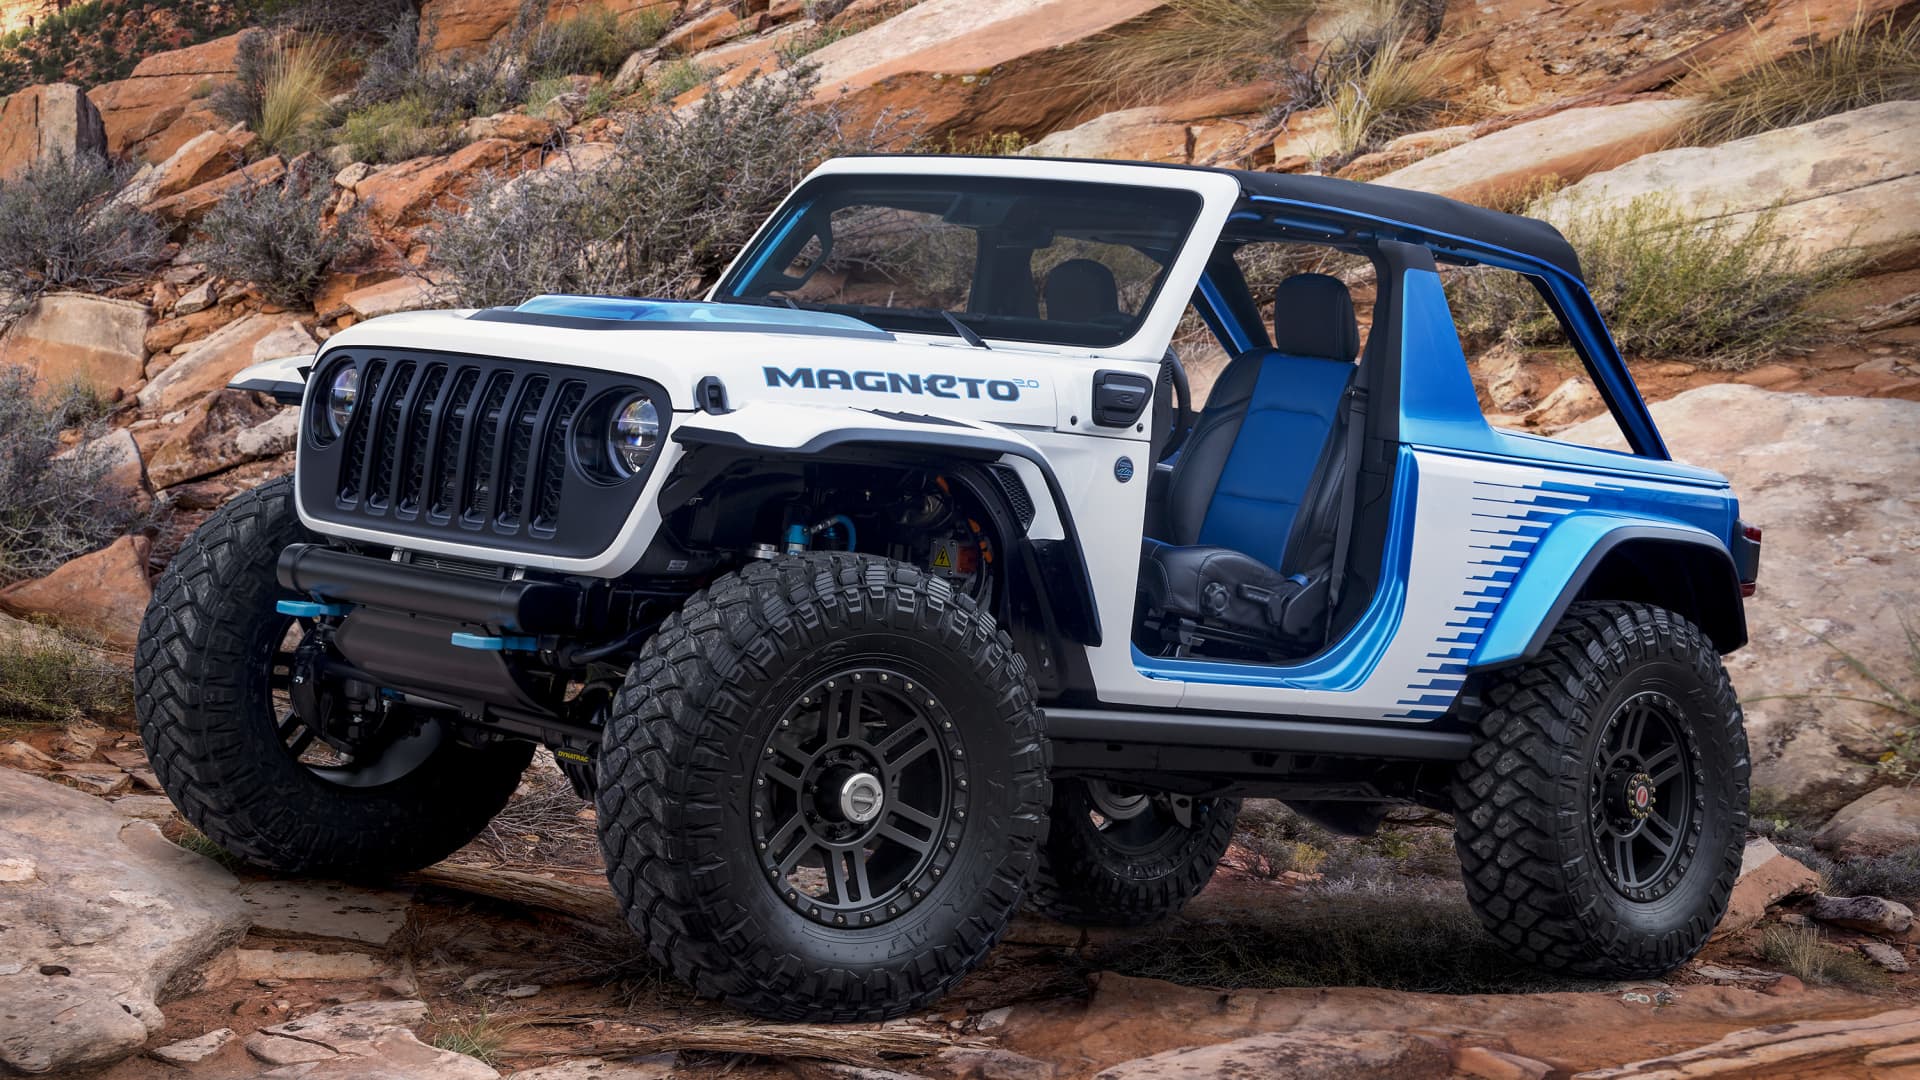 Jeep says its new electric Wrangler SUV concept goes 0-60 in 2 seconds – CNBC